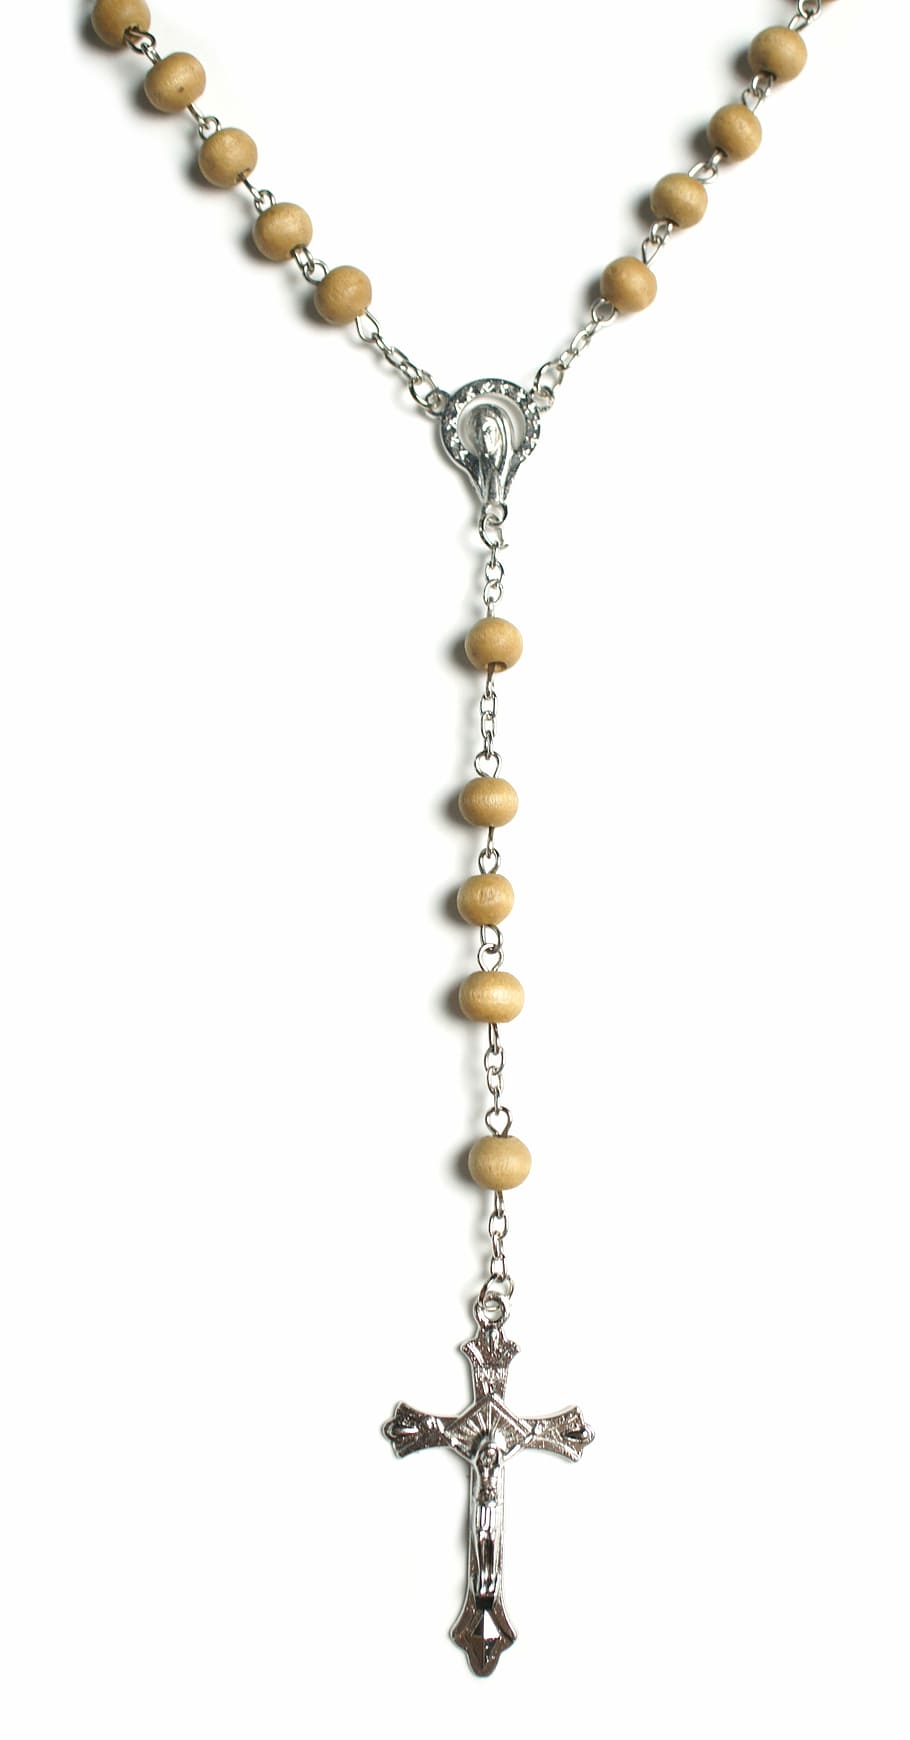 closeup, beaded, brown, silver-colored rosary, wooden rosary, wood, wooden, rosary, bead, silver